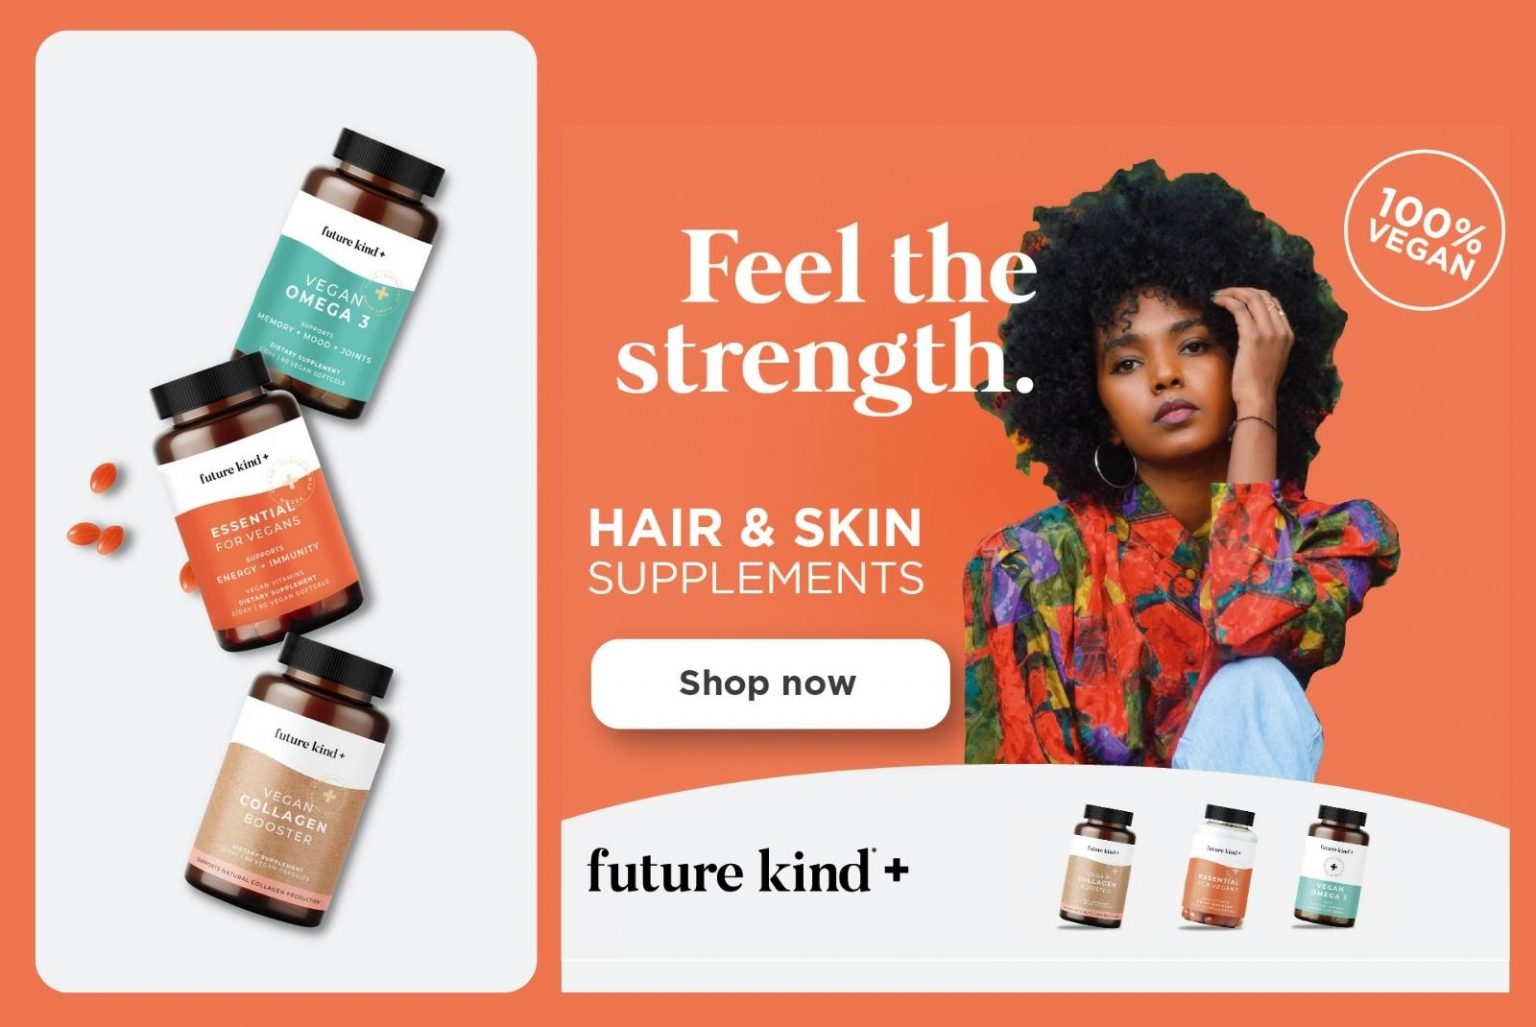 Future kind+ vegan hair, skin and nails vitamin supplements support your natural beauty.